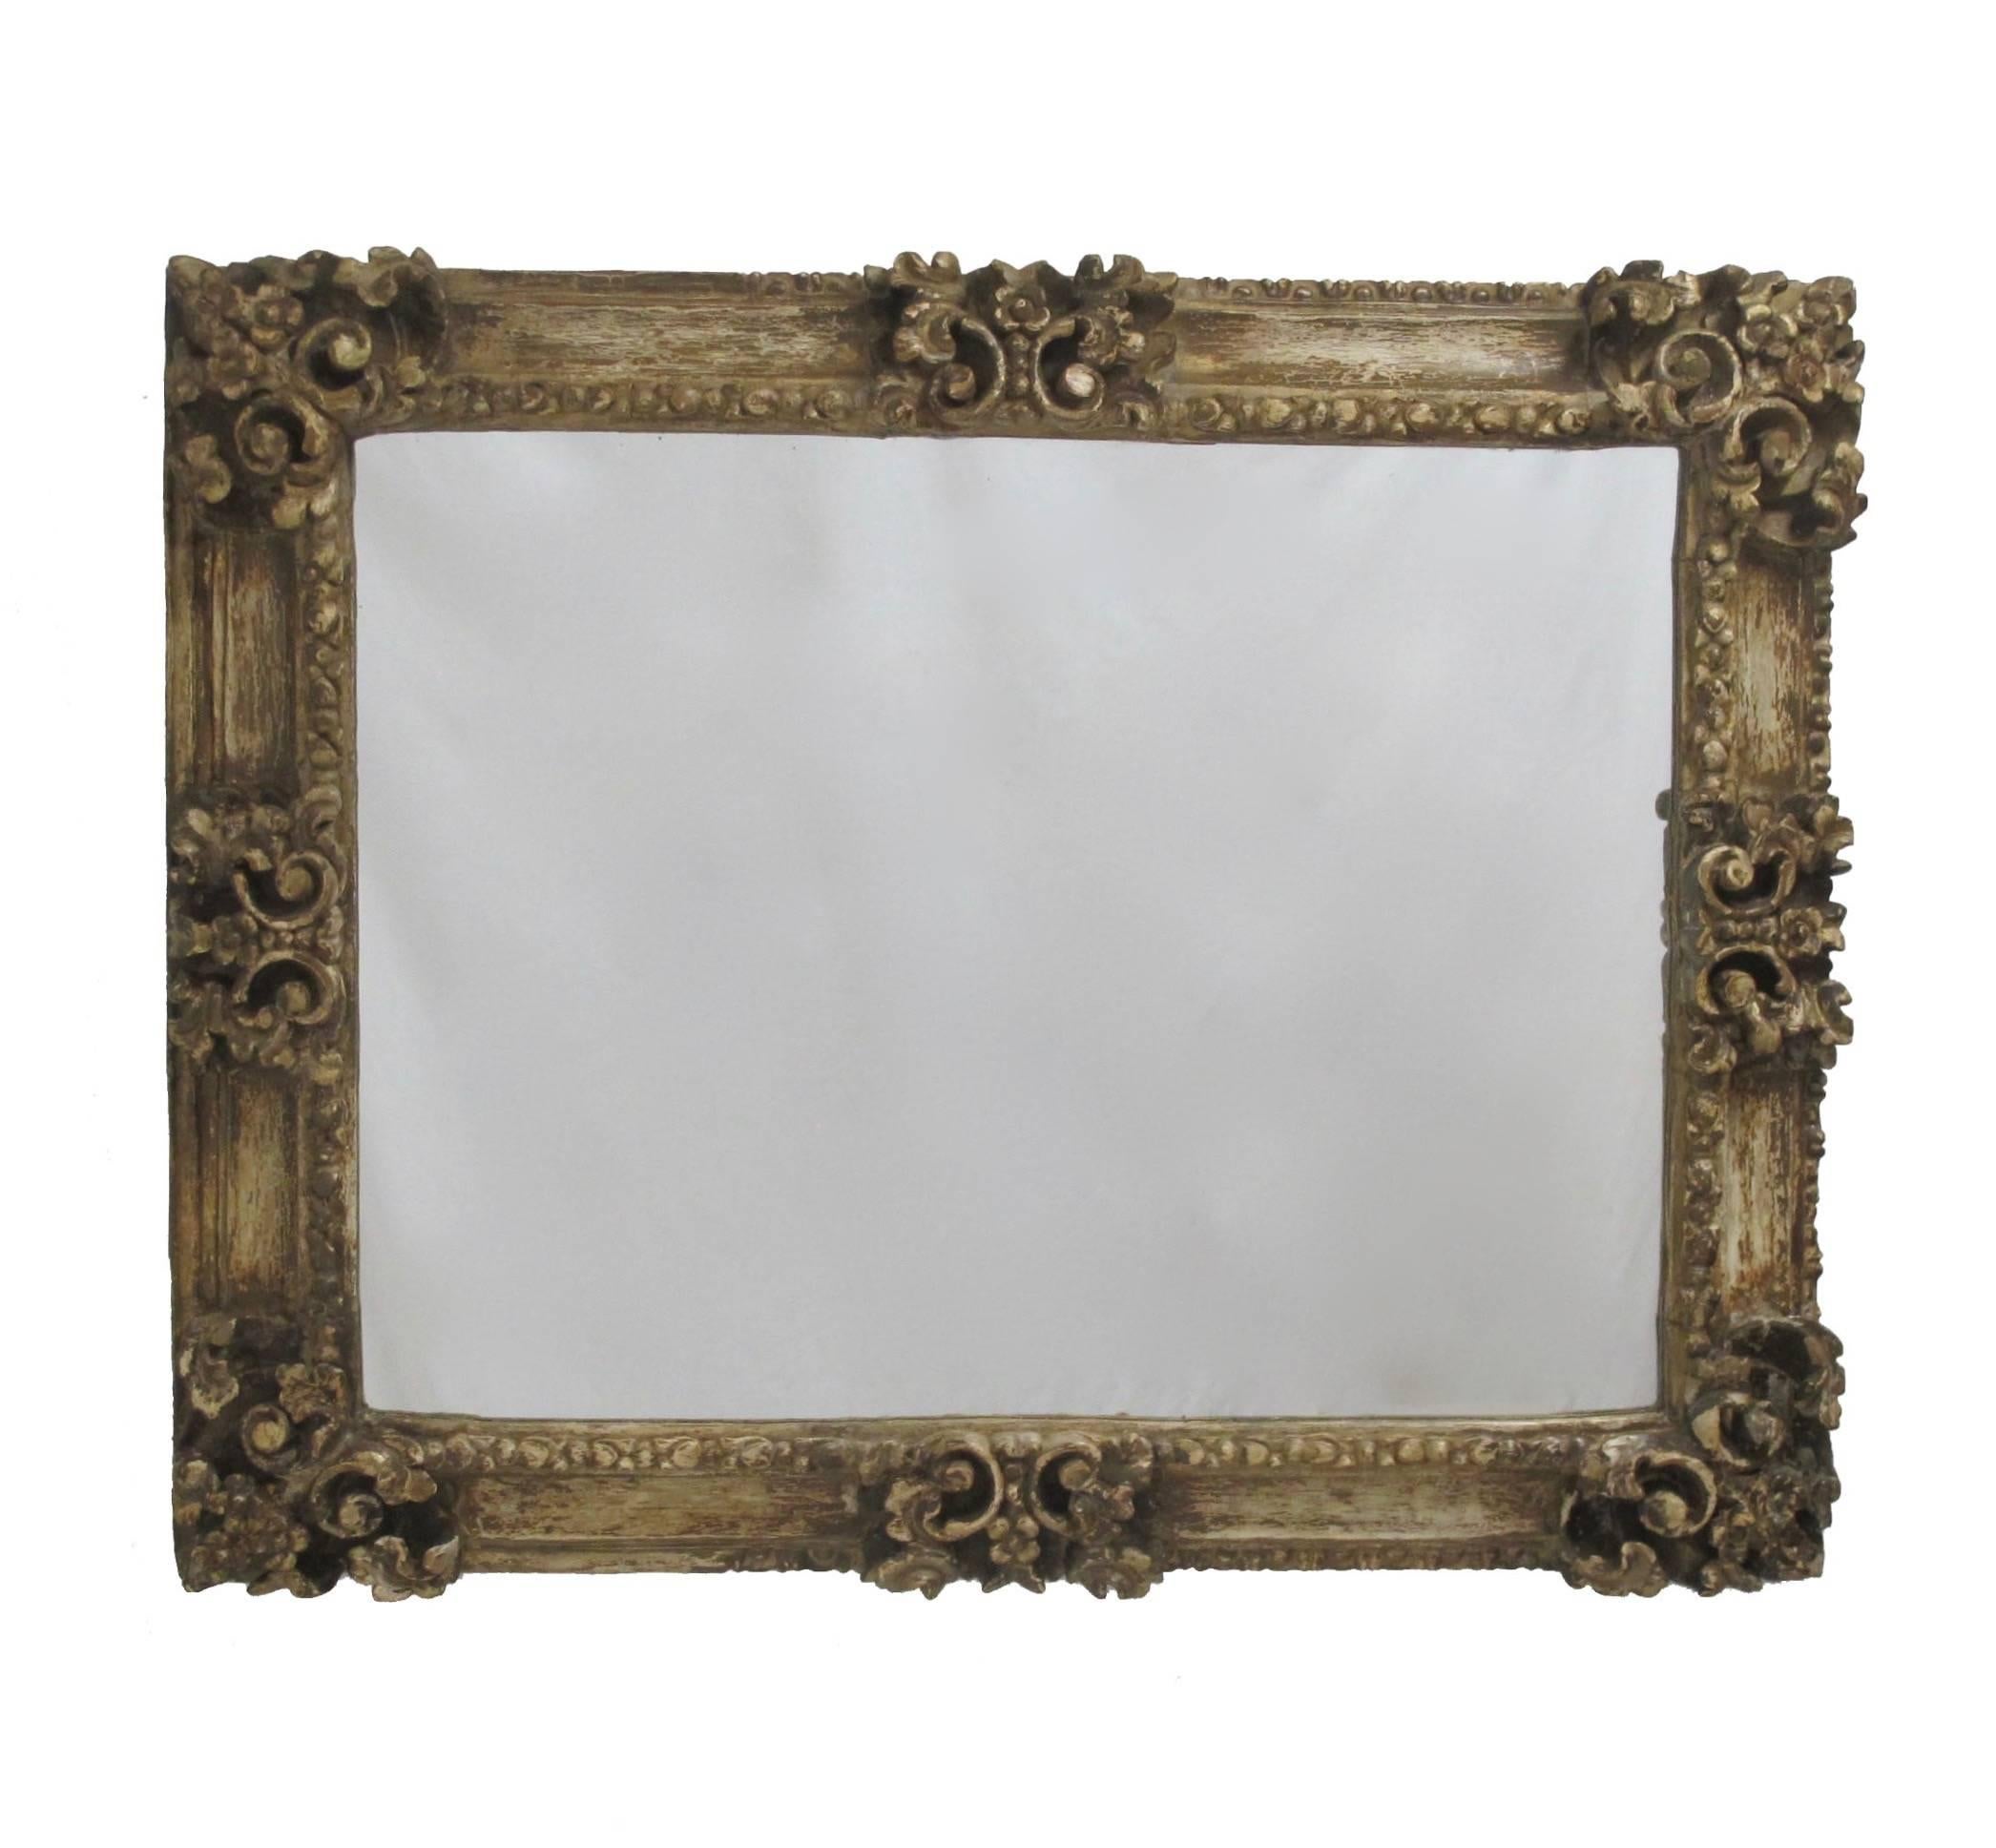 Partially stripped portrait frame made of pine. Heavily carved with leaves and flowers, and having remnants of old gilt paint. Converted into a mirror in the early 20th century. Spain, circa 1800.